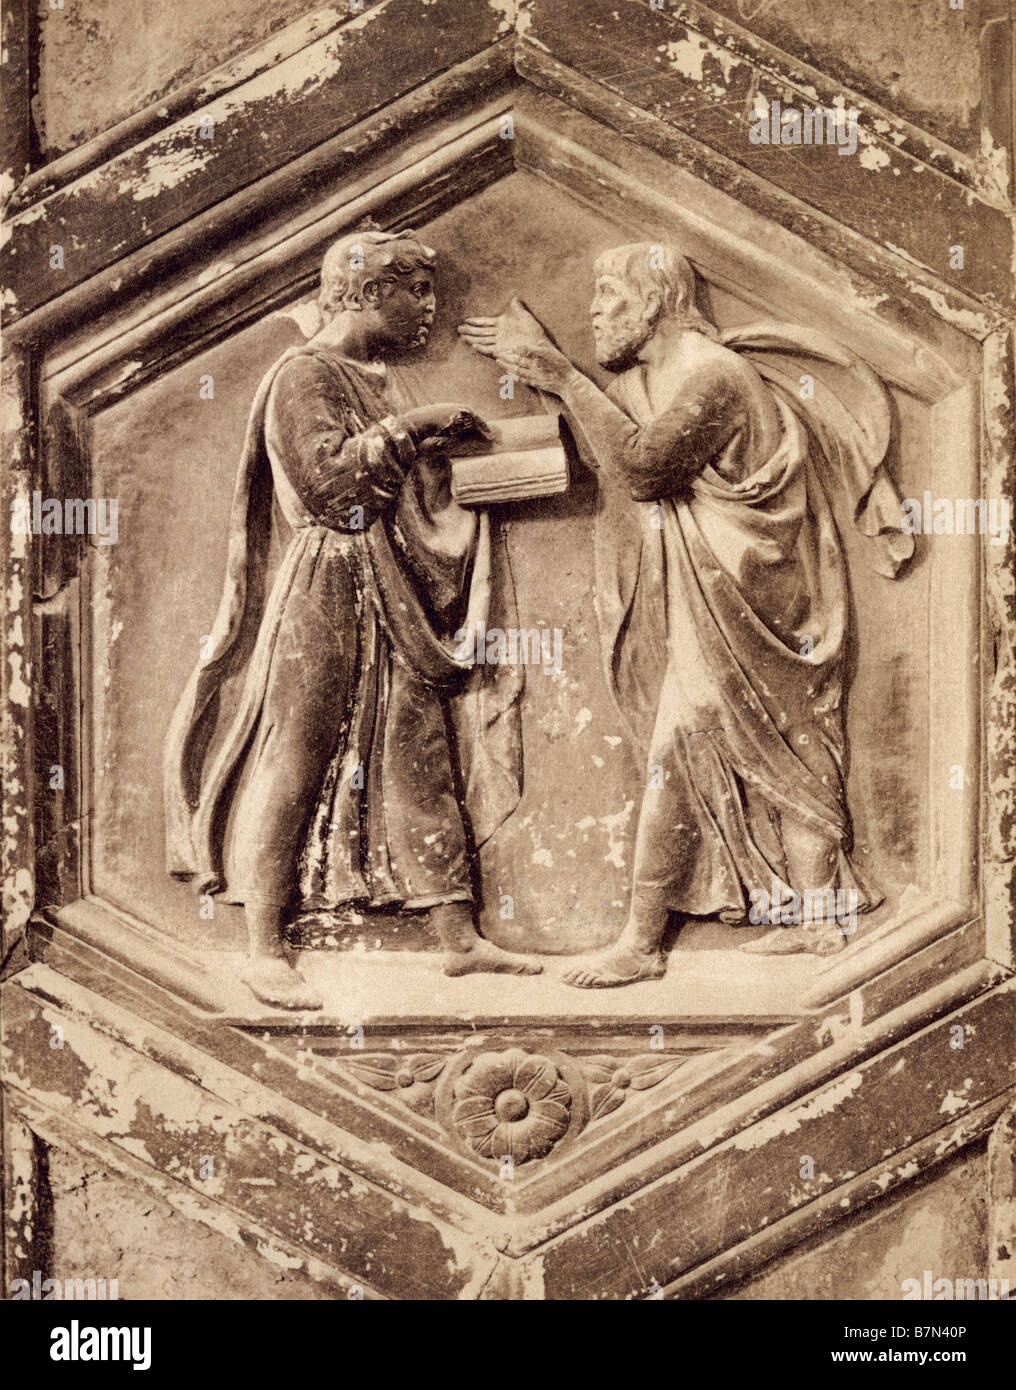 Plato and Aristotle shown in a bas relief titled Logic by Giotto on the doors of the Campanile Florence. Photograph Stock Photo